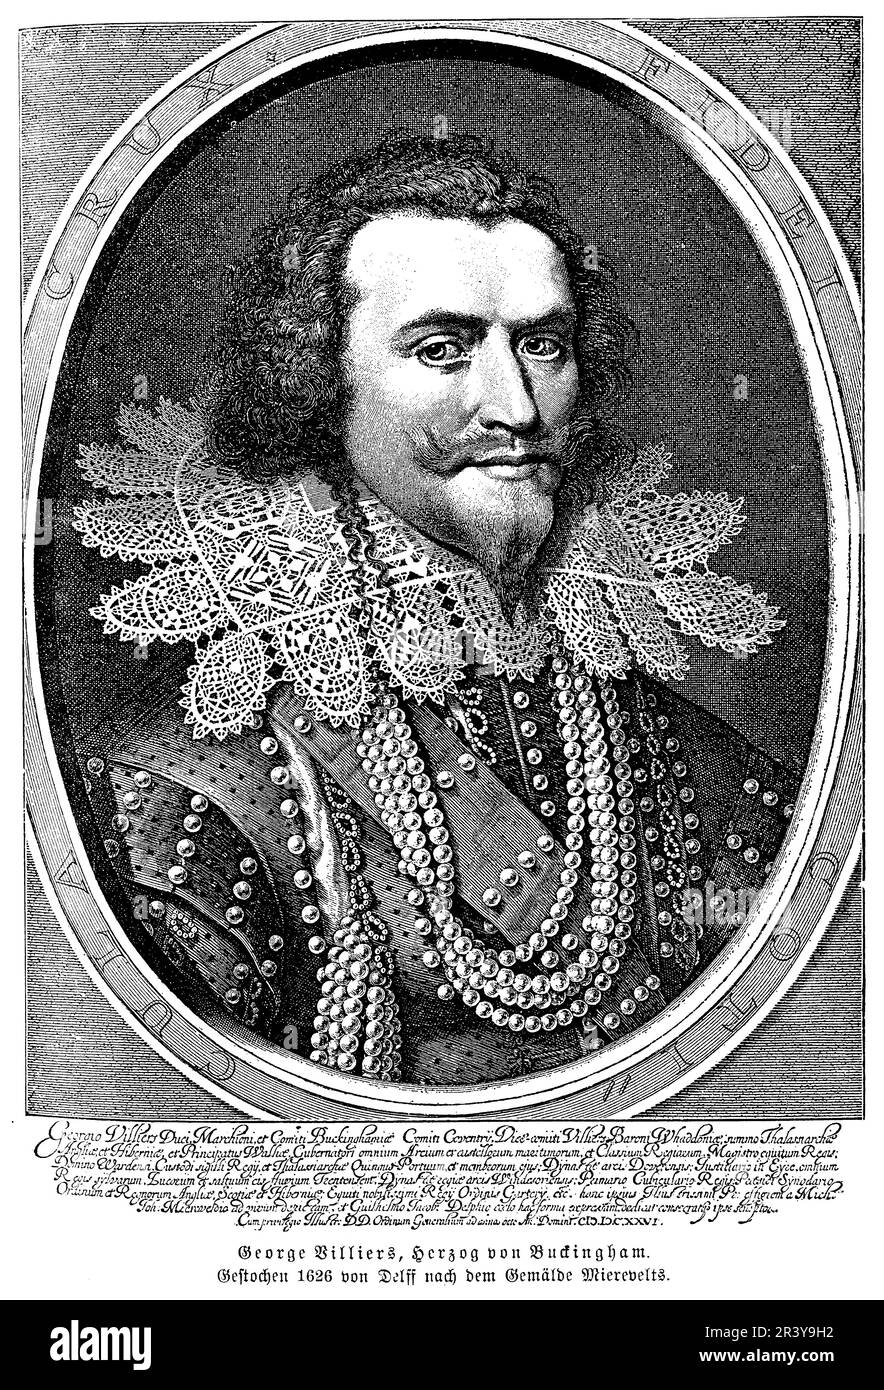 George Villiers, also known as the Duke of Buckingham, was a 17th-century English statesman and courtier who rose to prominence as a favorite of King James I and King Charles I. He played a significant role in English politics and foreign policy, including a failed attempt to form an Anglo-French alliance. He is also known for his controversial private life and his involvement in a number of political scandals. His assassination in 1628 marked the end of his political career. Stock Photo